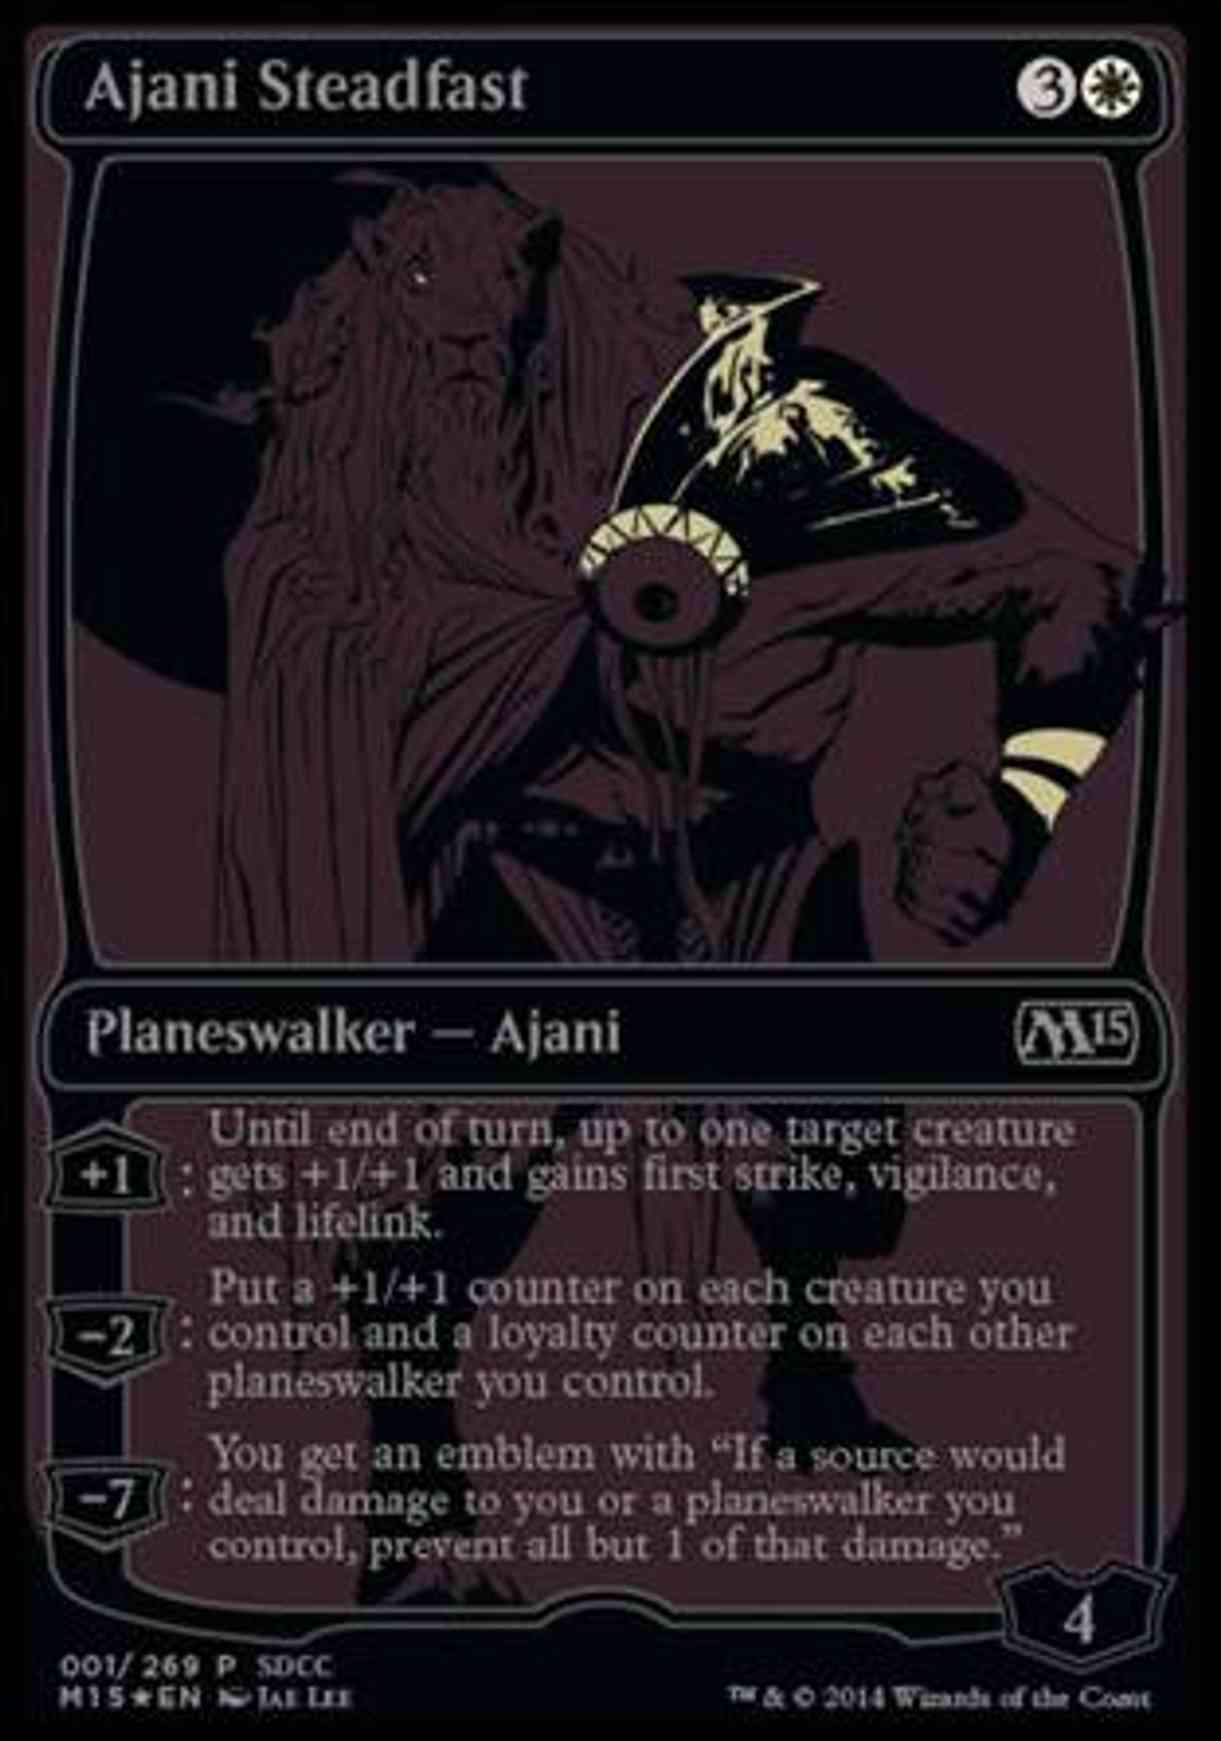 Ajani Steadfast (SDCC 2014 Exclusive) magic card front